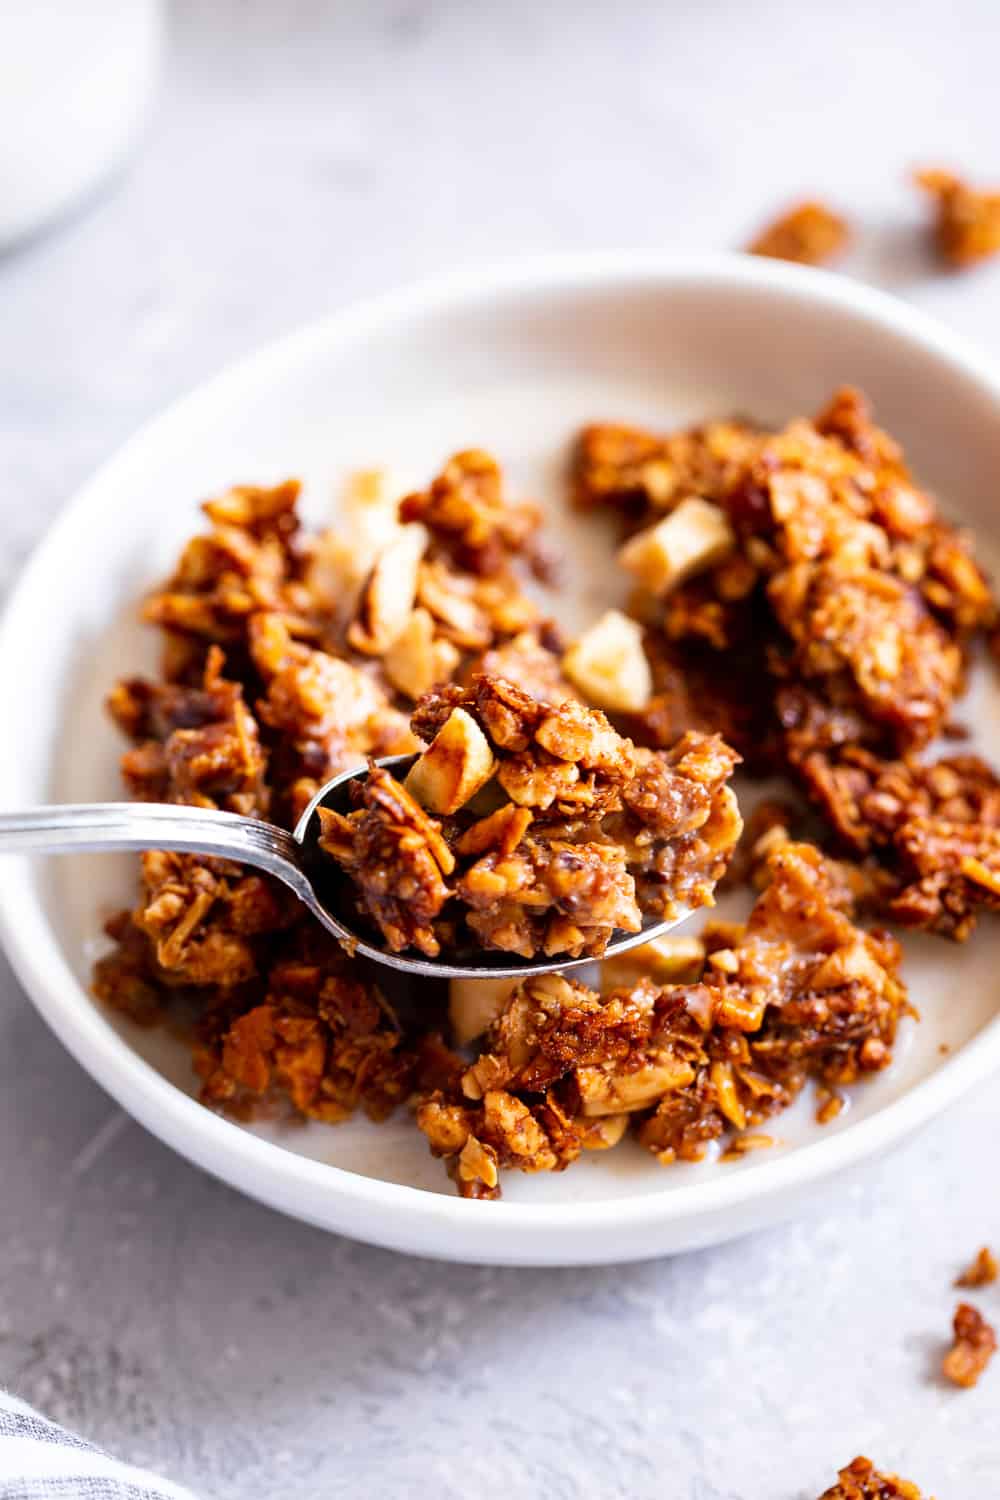 This apple cinnamon granola is the ultimate grain free granola for fall! Packed with apple pie spice, chopped nuts, coconut, chewy dried apples and sweetened with maple syrup, this baked granola is perfect for breakfast with dairy free milk or for snacking on by the handful! It’s vegan, dairy free, and paleo friendly. #paleo #vegan #cleaneating